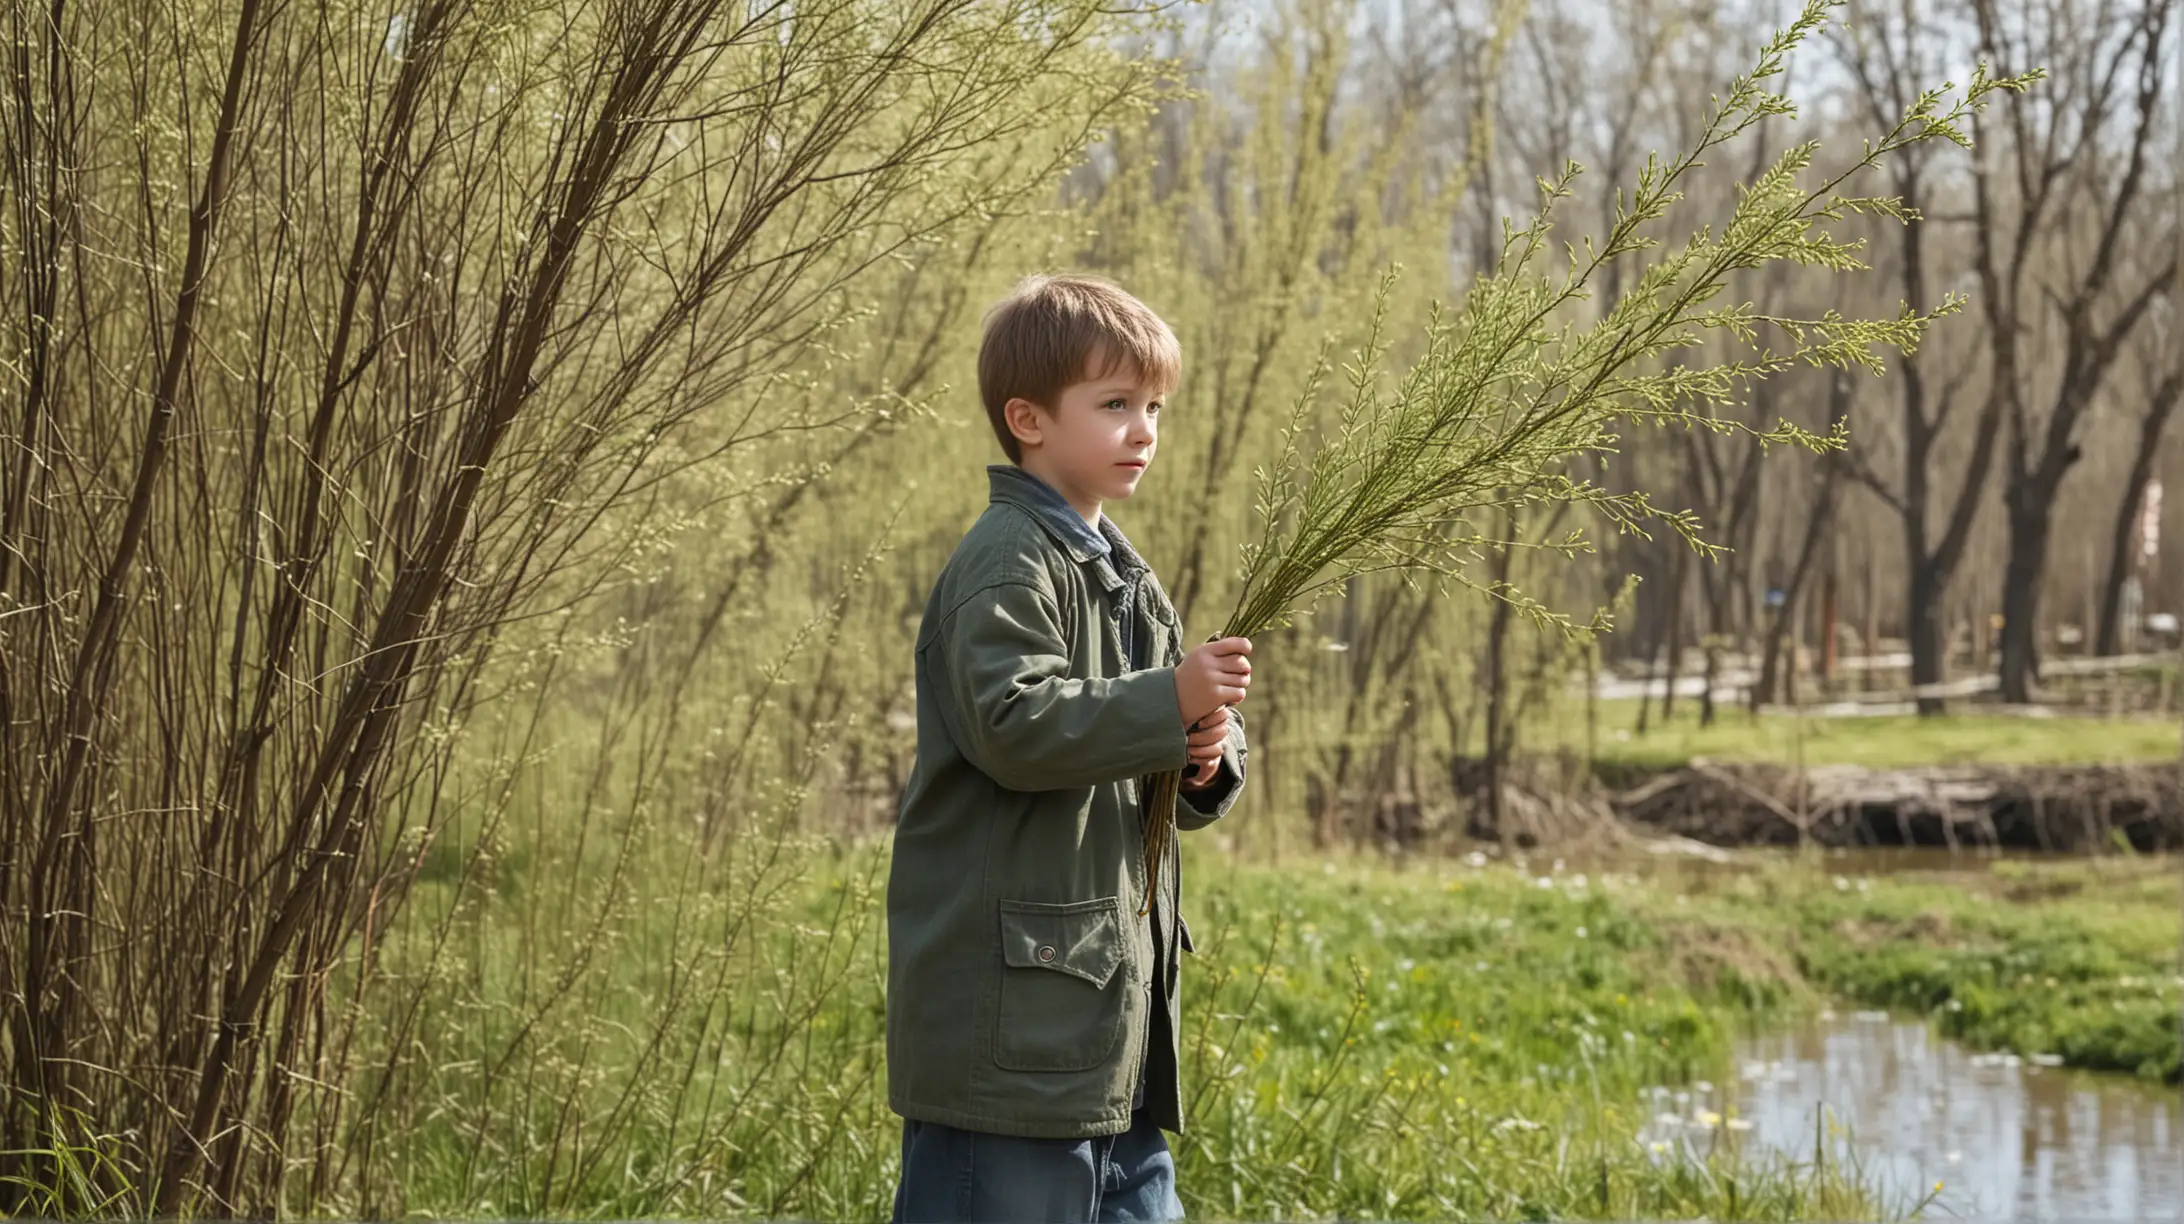 Boy Playing with Willow Branch in Springtime Meadow